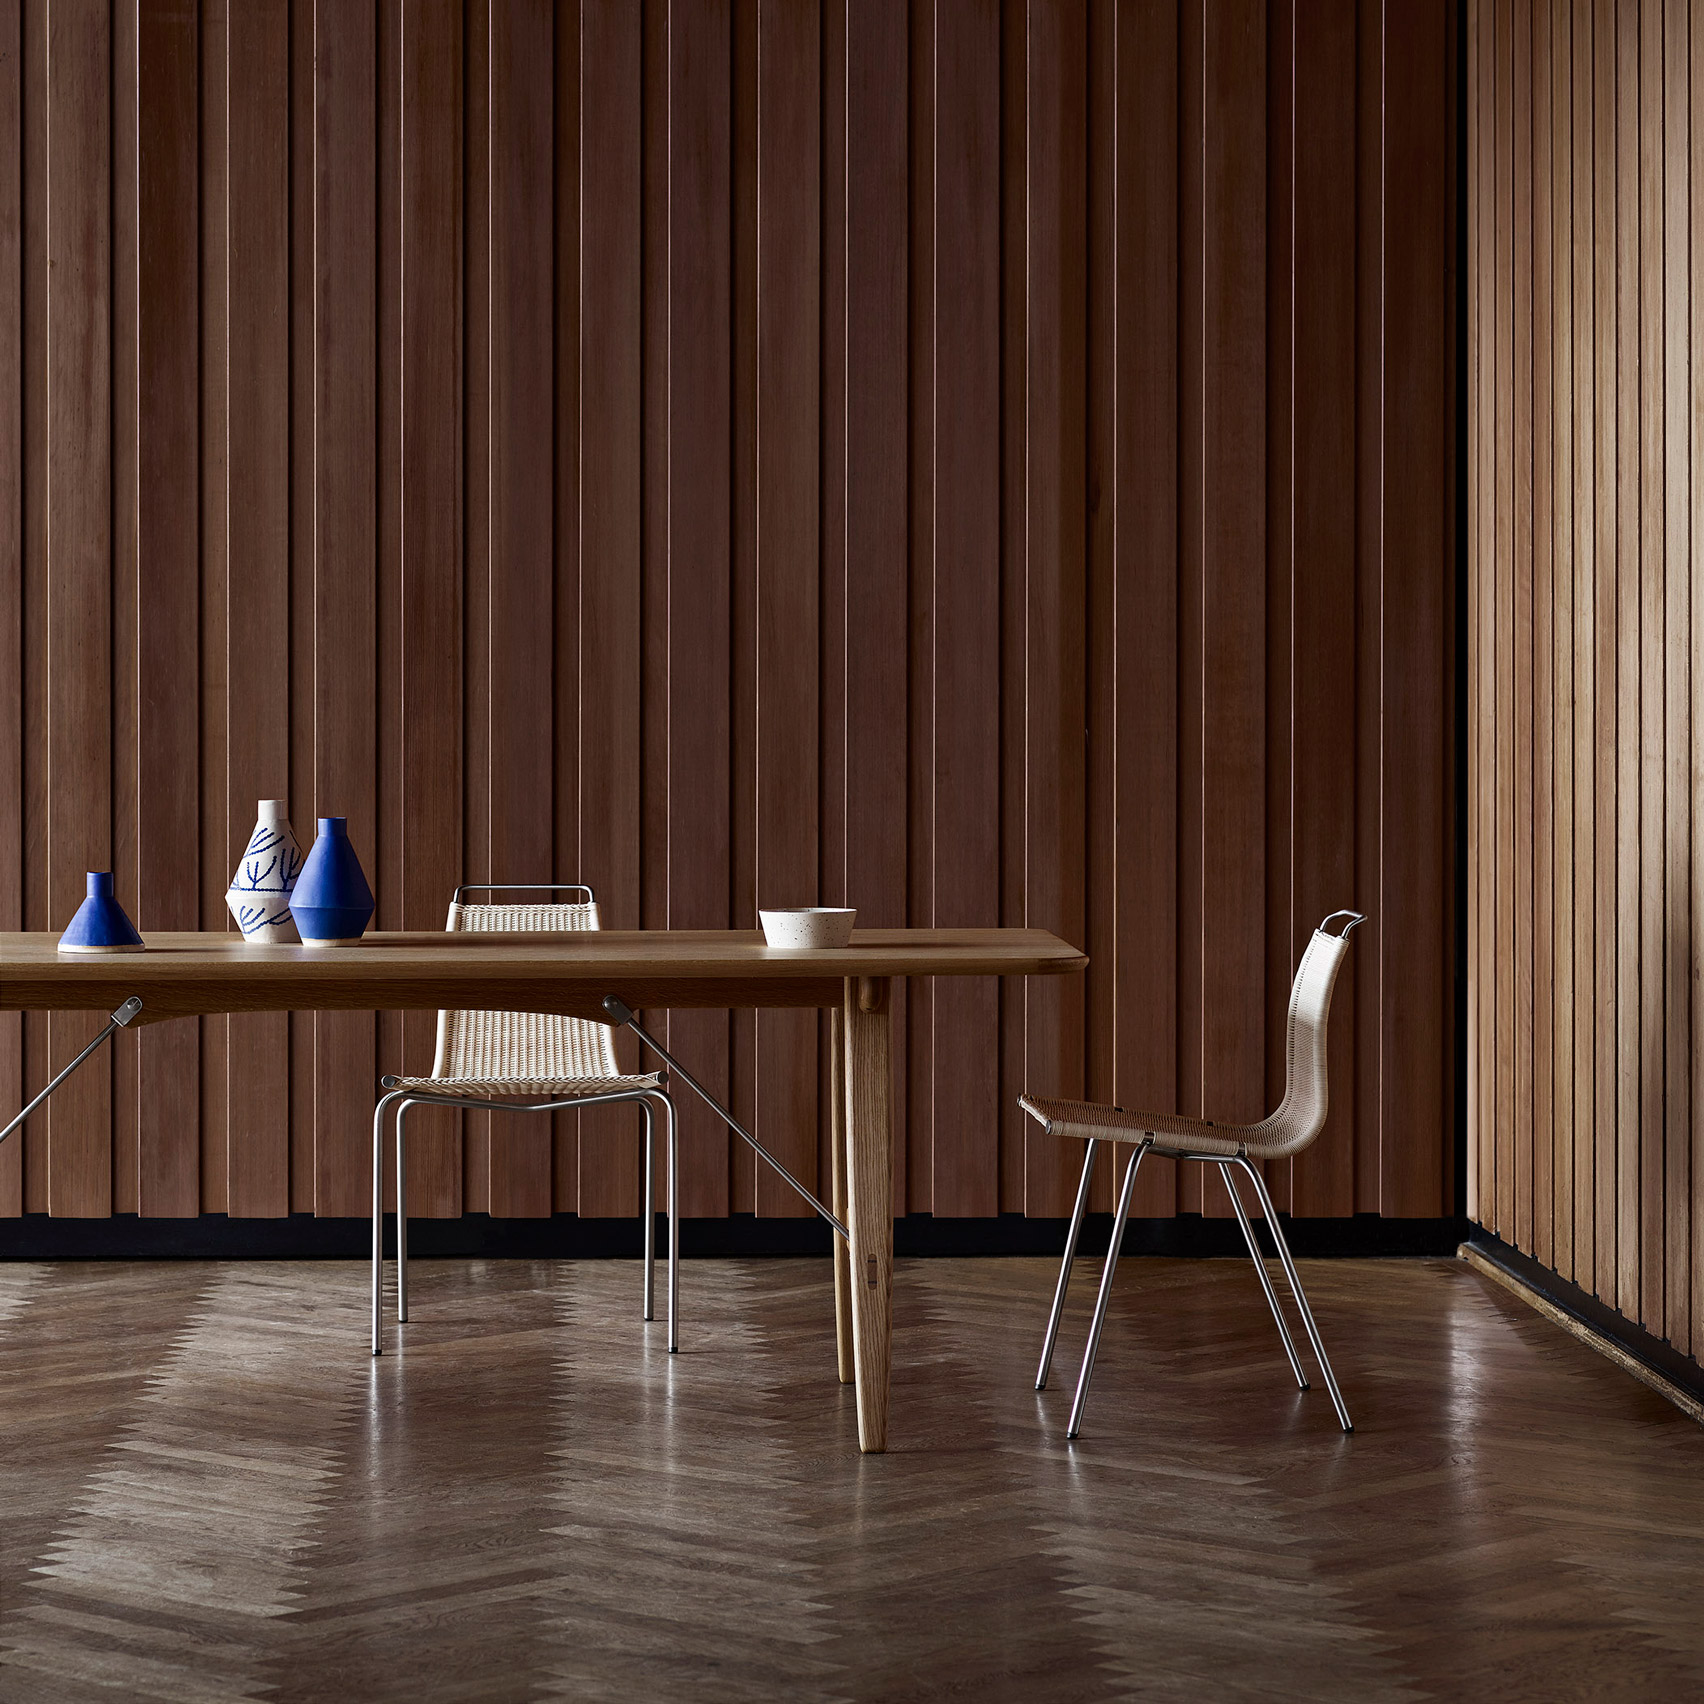 Hunting Table by Børge Mogensen, 1950 - Mid-century furniture designs relaunched at Stockholm Design Week